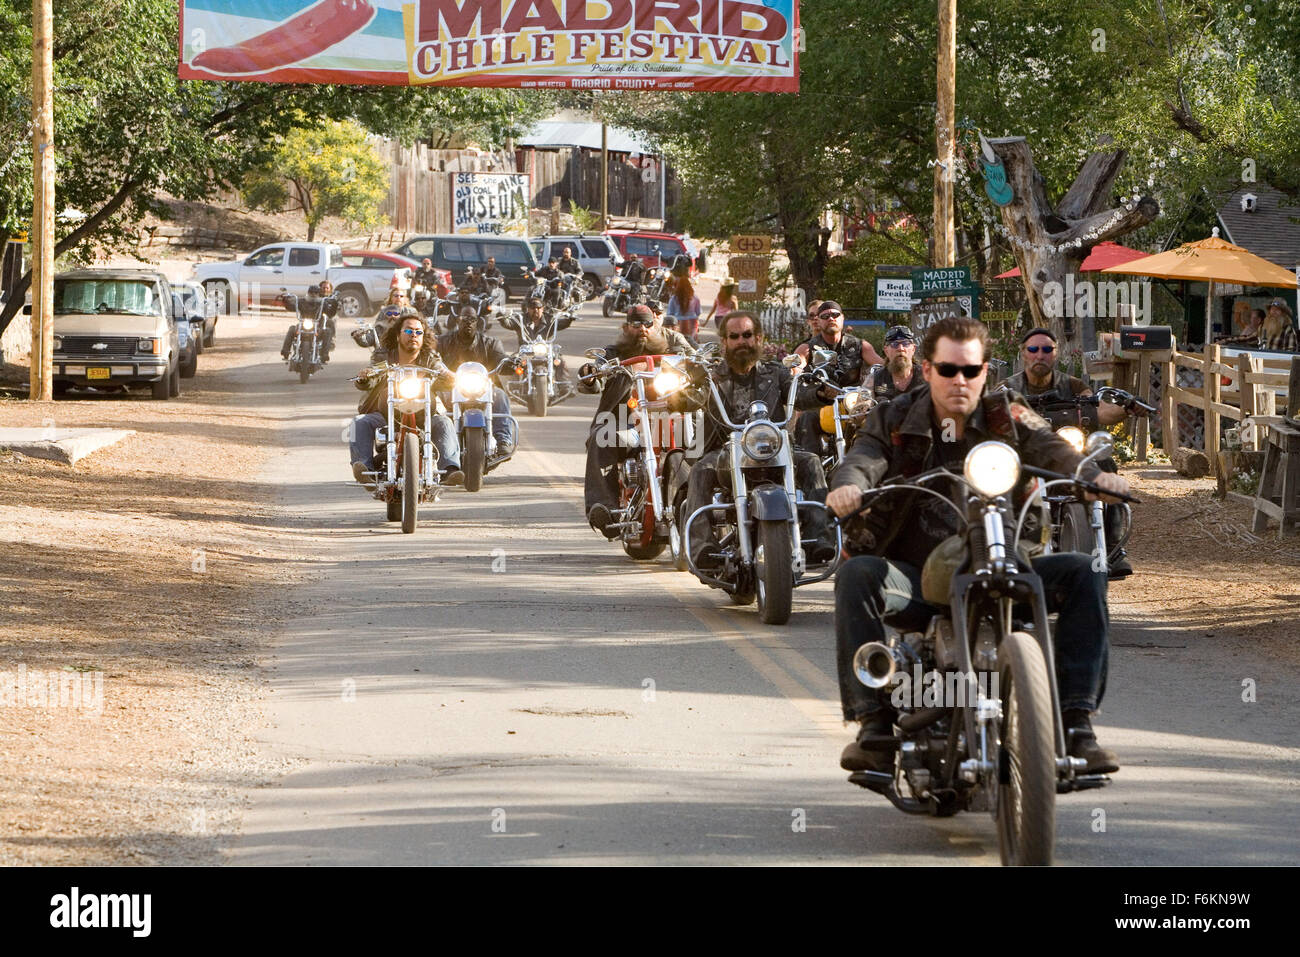 RELEASE DATE: March 2, 2007. MOVIE TITLE: Wild Hogs. STUDIO: Touchstone Pictures. PLOT: A group of suburban biker wannabes look for adventure hit the open road in search of adventure, but get more than they bargained for when they encounter a New Mexico gang called the Del Fuegos. PICTURED: RAY LIOTTA as Jack. Stock Photo